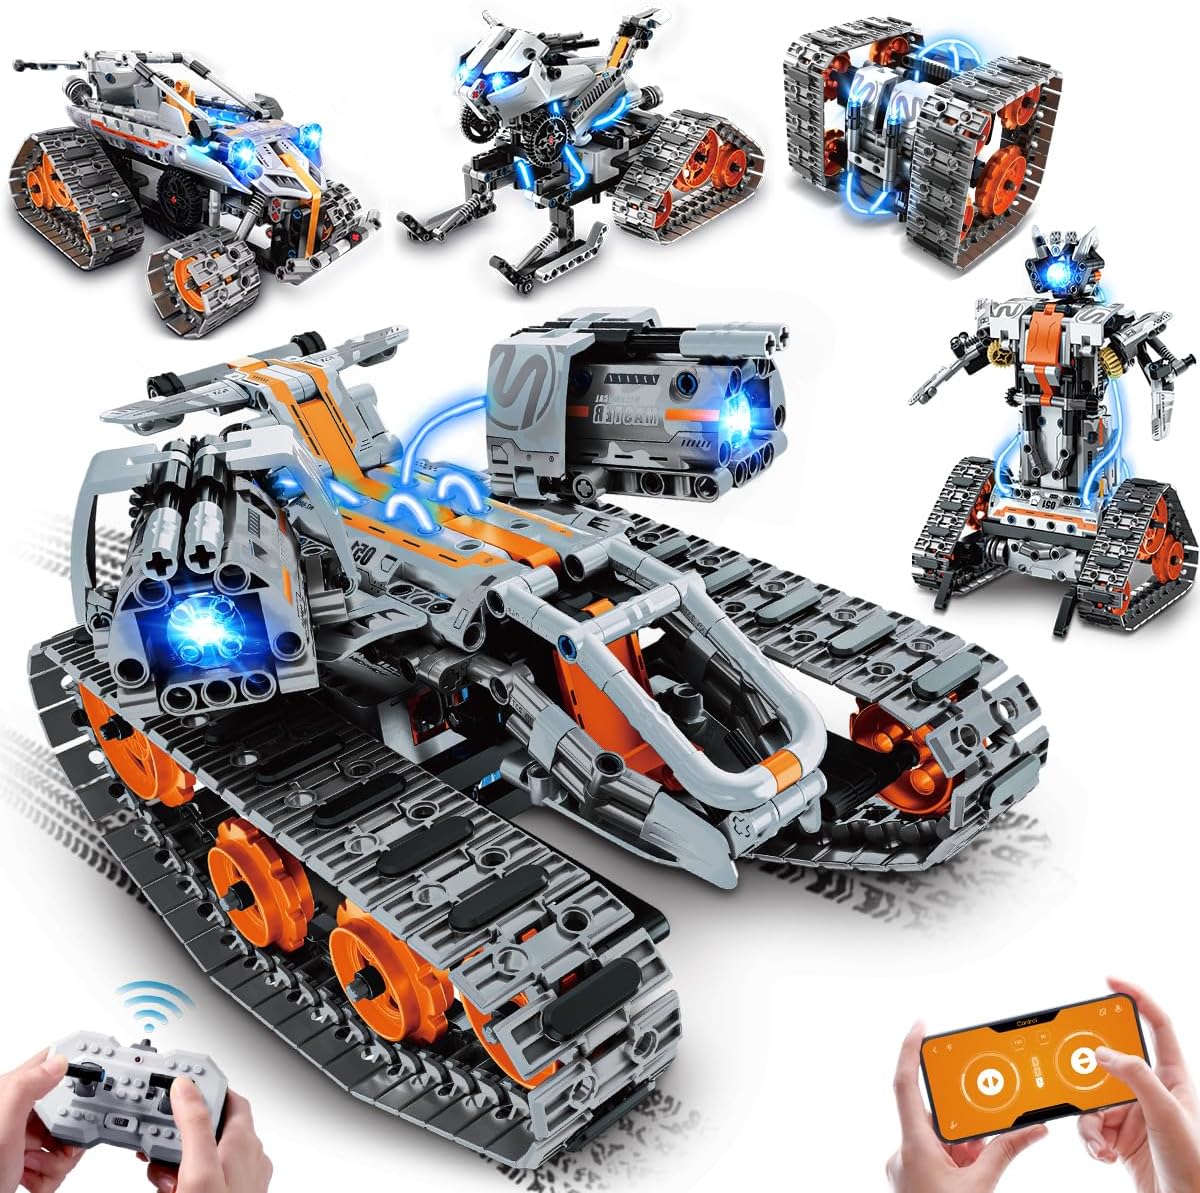 5-in-1 Building Toys with LED Light, APP & Remote Controll STEM Building Block Set, 604 PCS RC Tech Tank Robot Sleigh Tracked Racer Toy Gift for Kids Boys Girls Ages 6 7 8 9 10 11 12+ Years Old